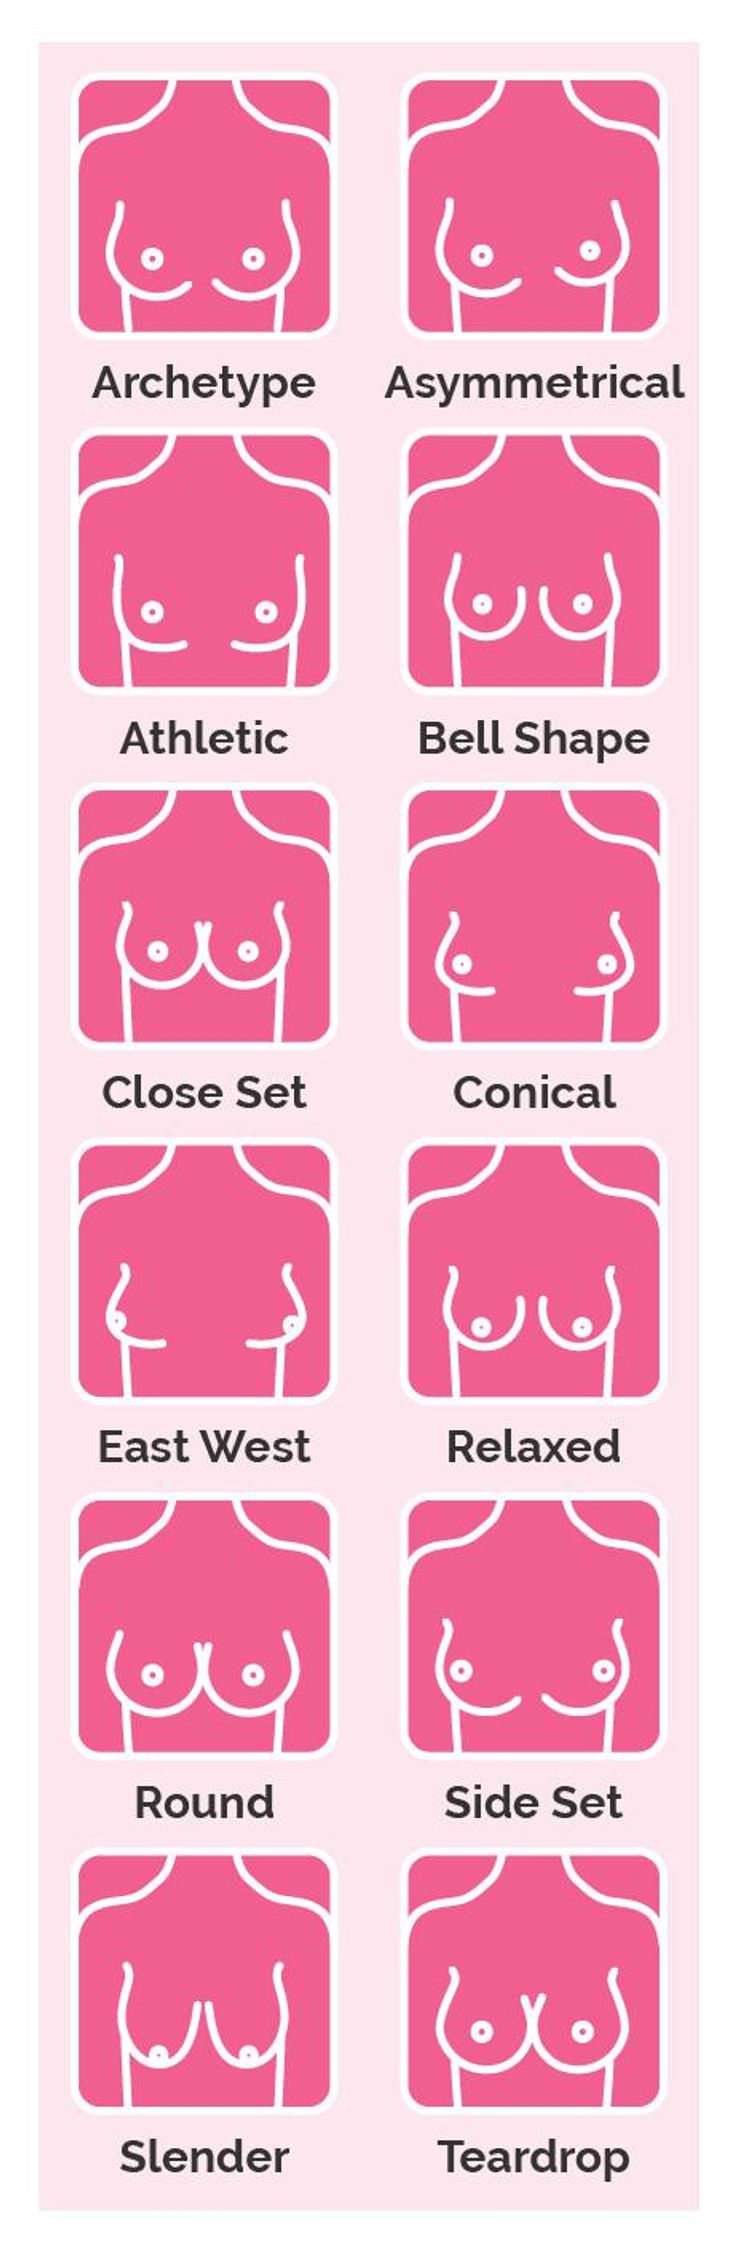 East West Breasts Overview: What to Know